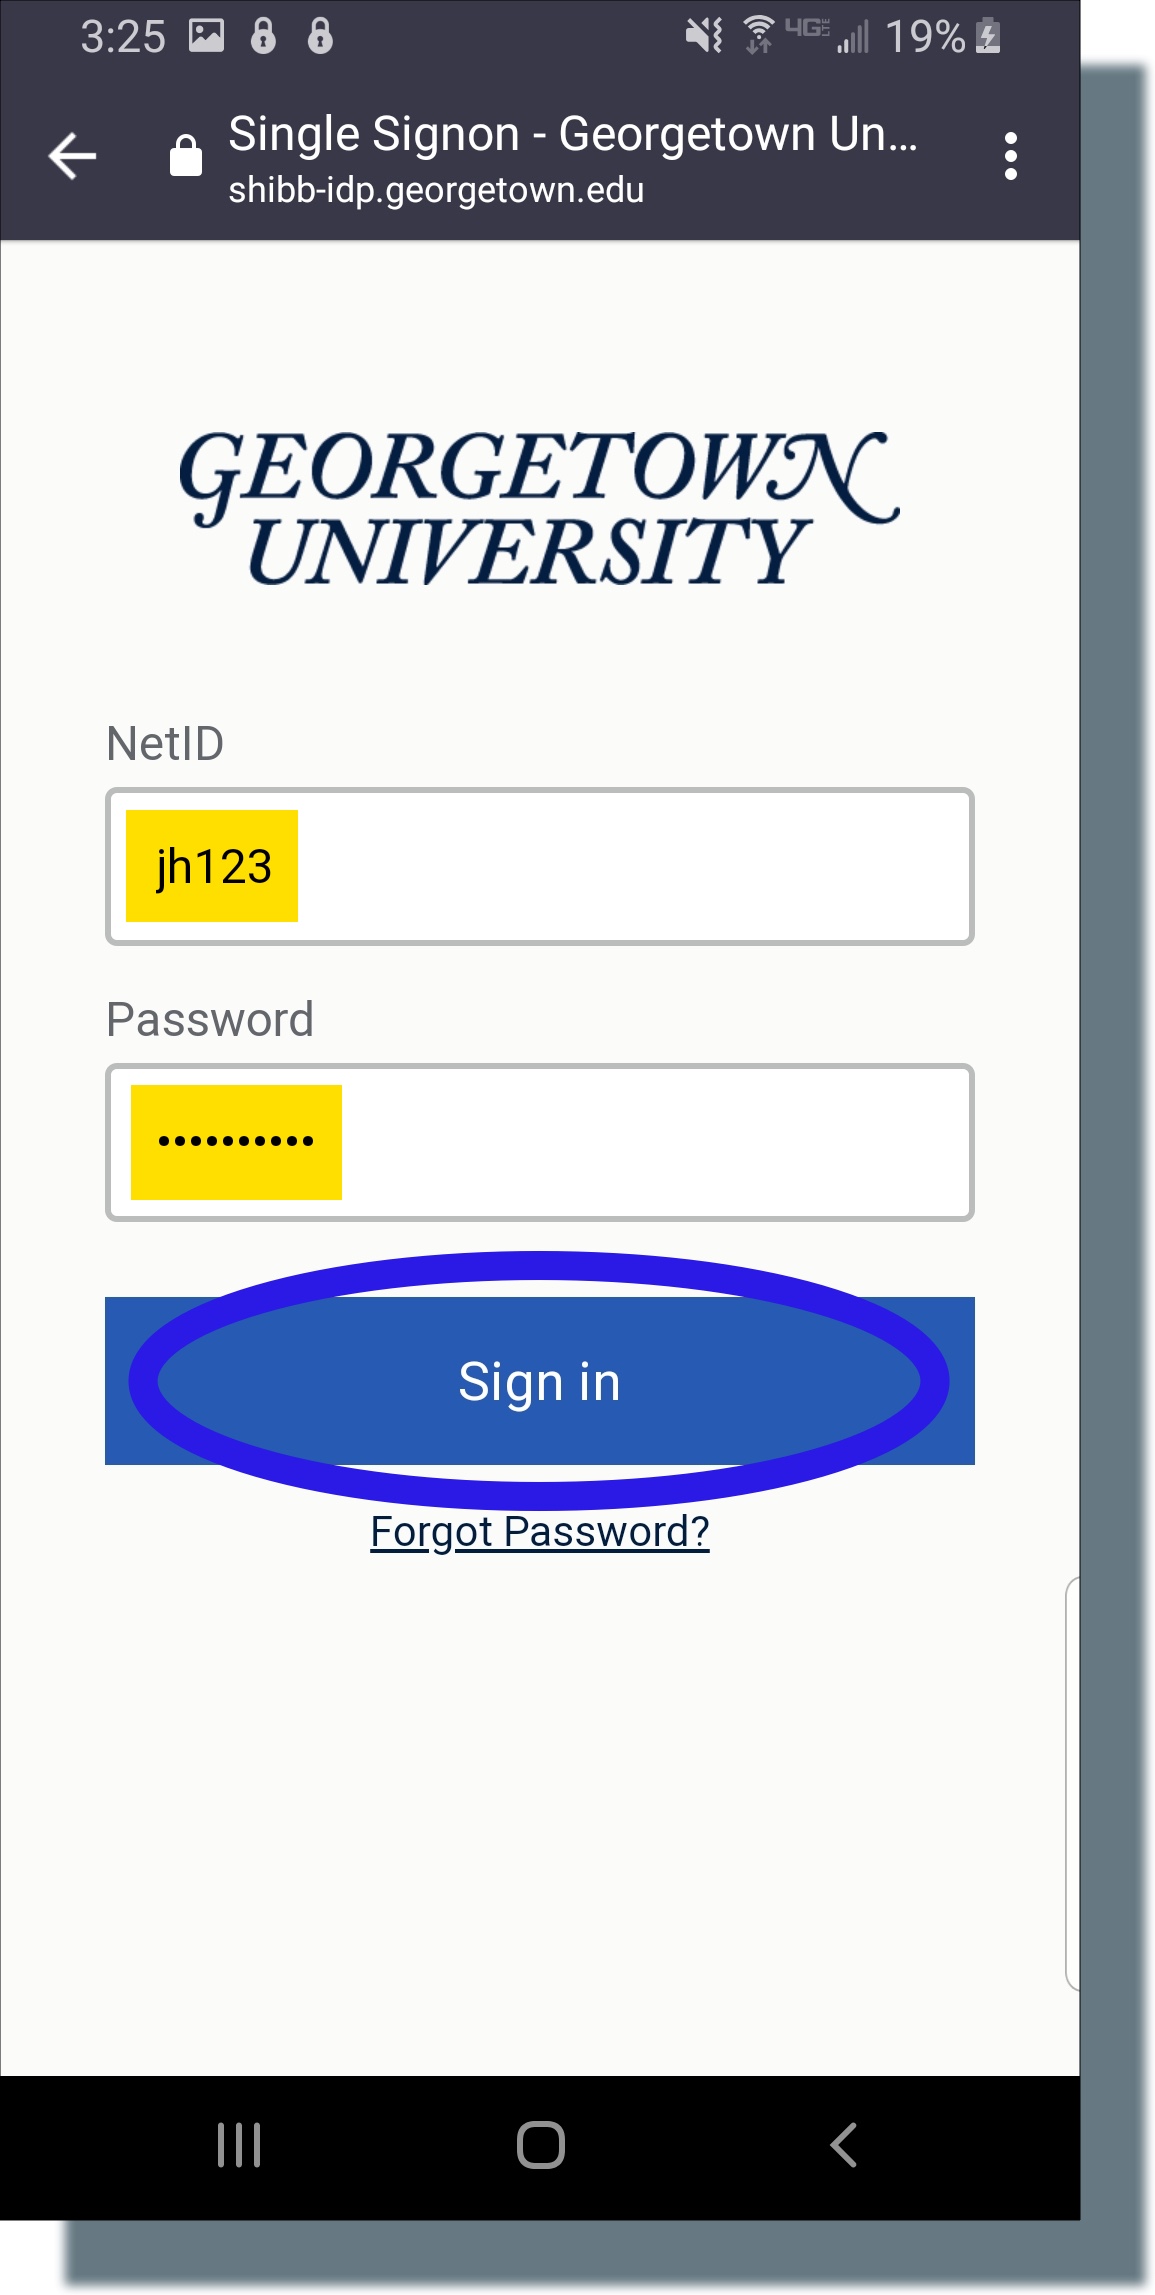 Enter your NetID and password